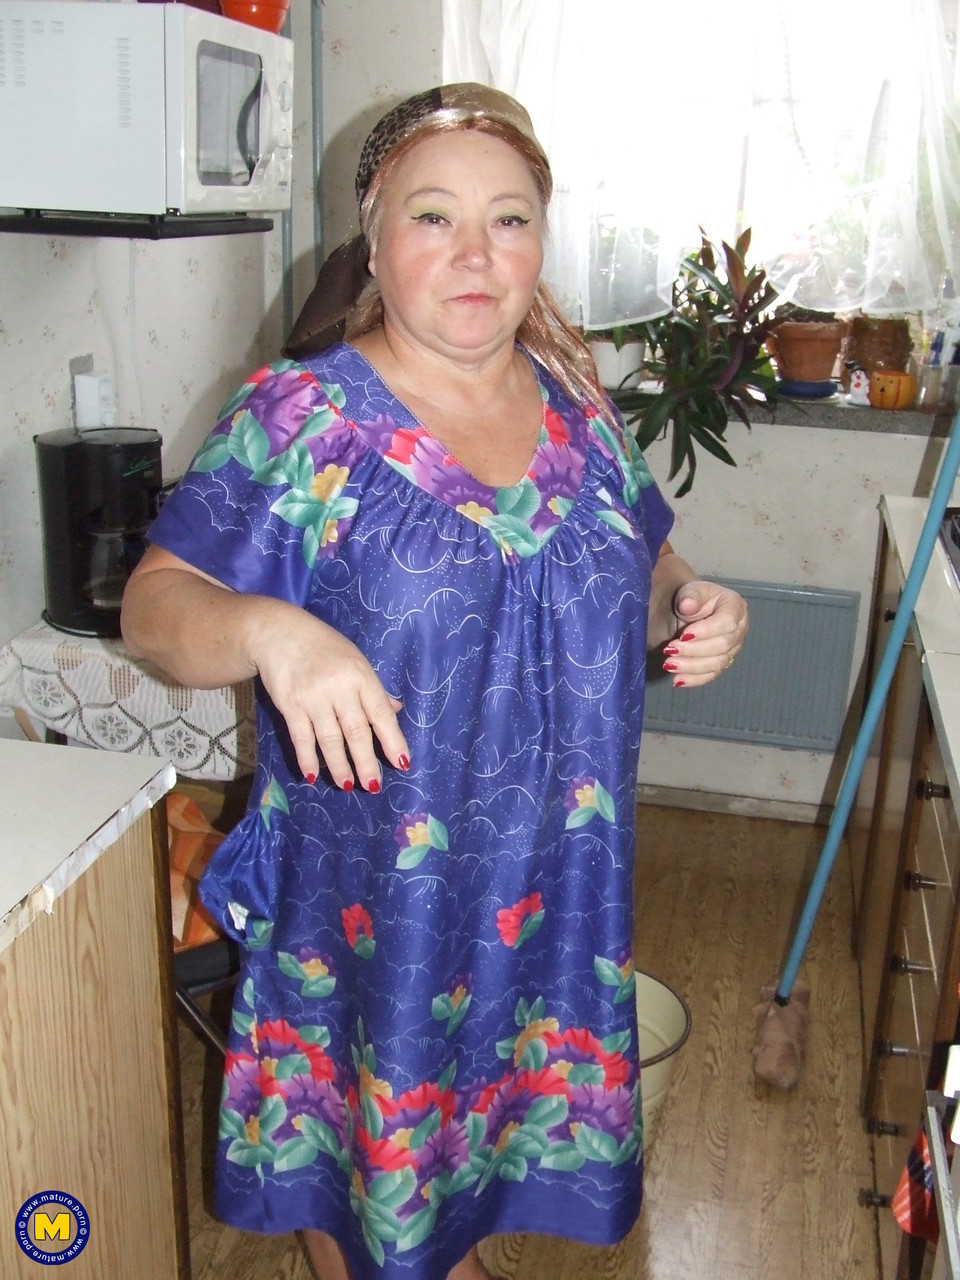 Fat granny Regina strips her clothes and poses while cleaning the kitchen 포르노 사진 #425872105 | Mature NL Pics, Regina, Mature, 모바일 포르노